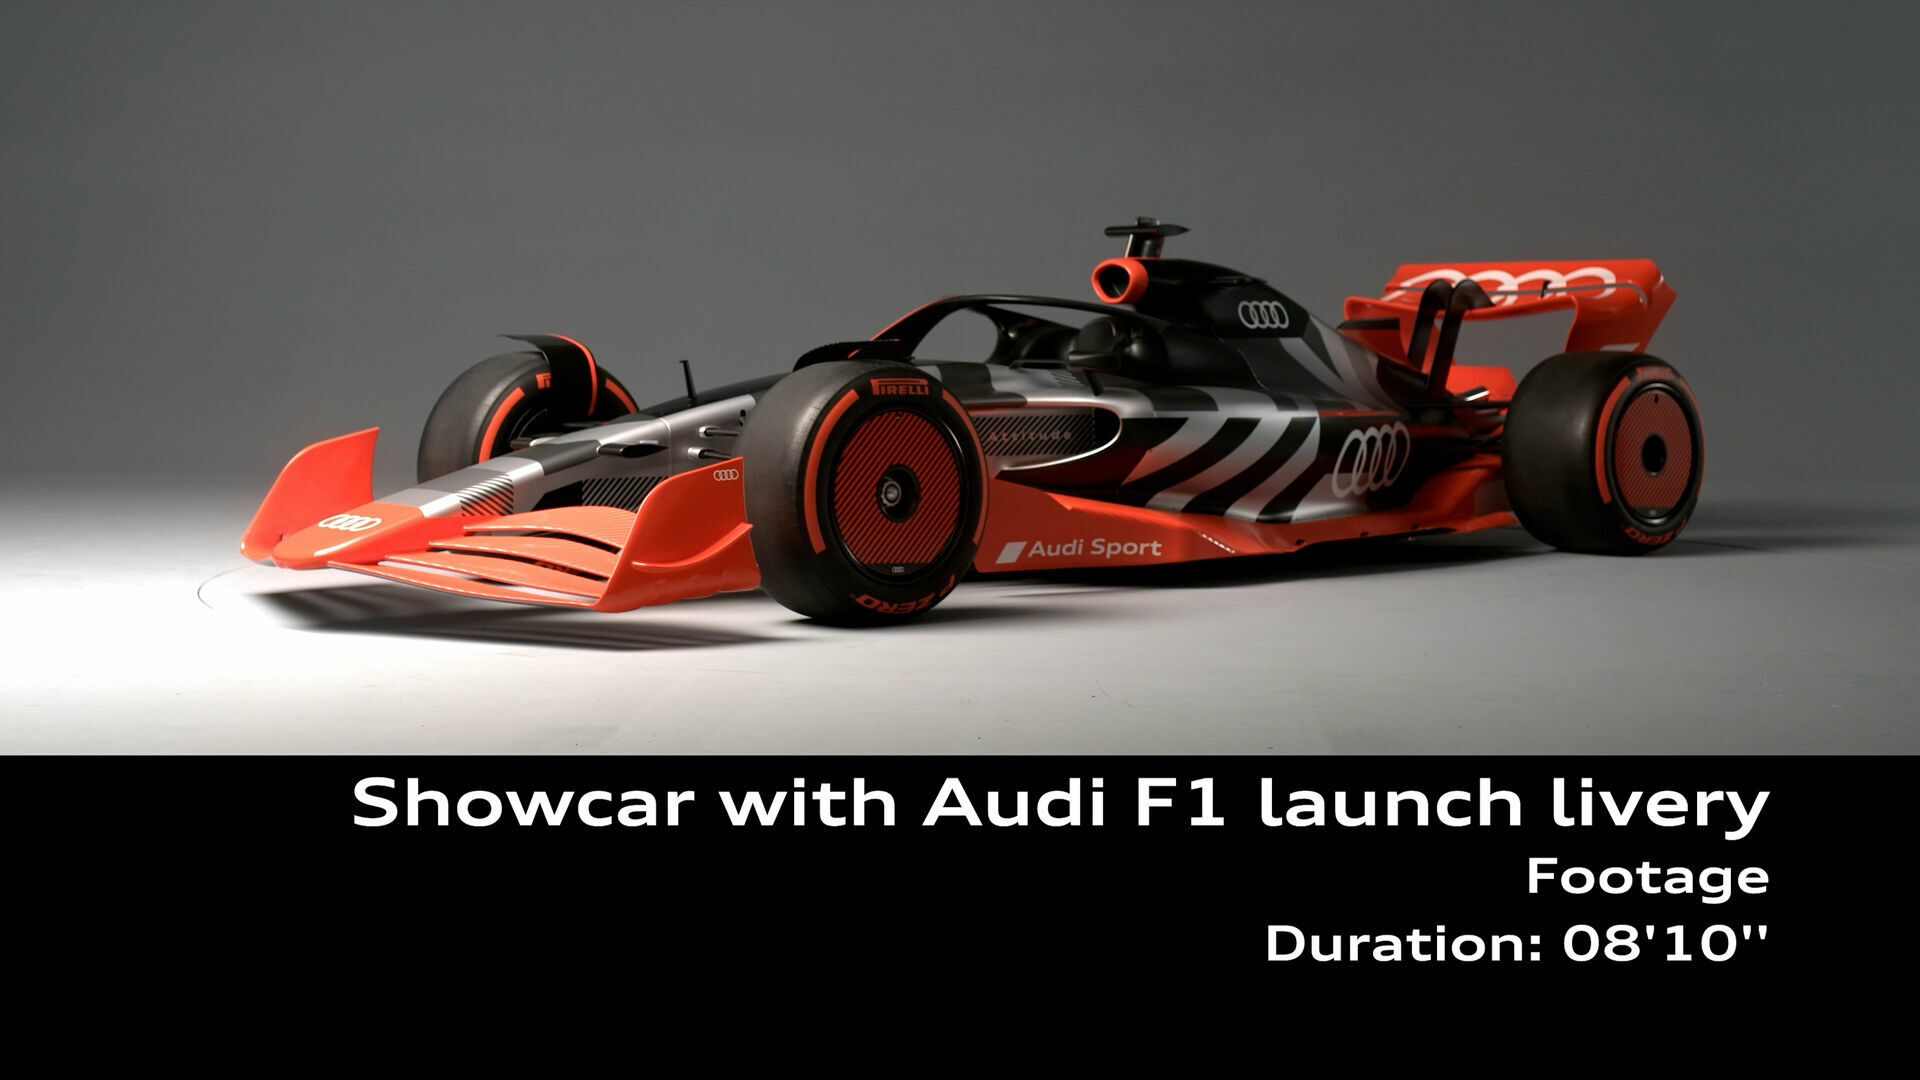 Footage: Showcar mit Audi F1 launch livery